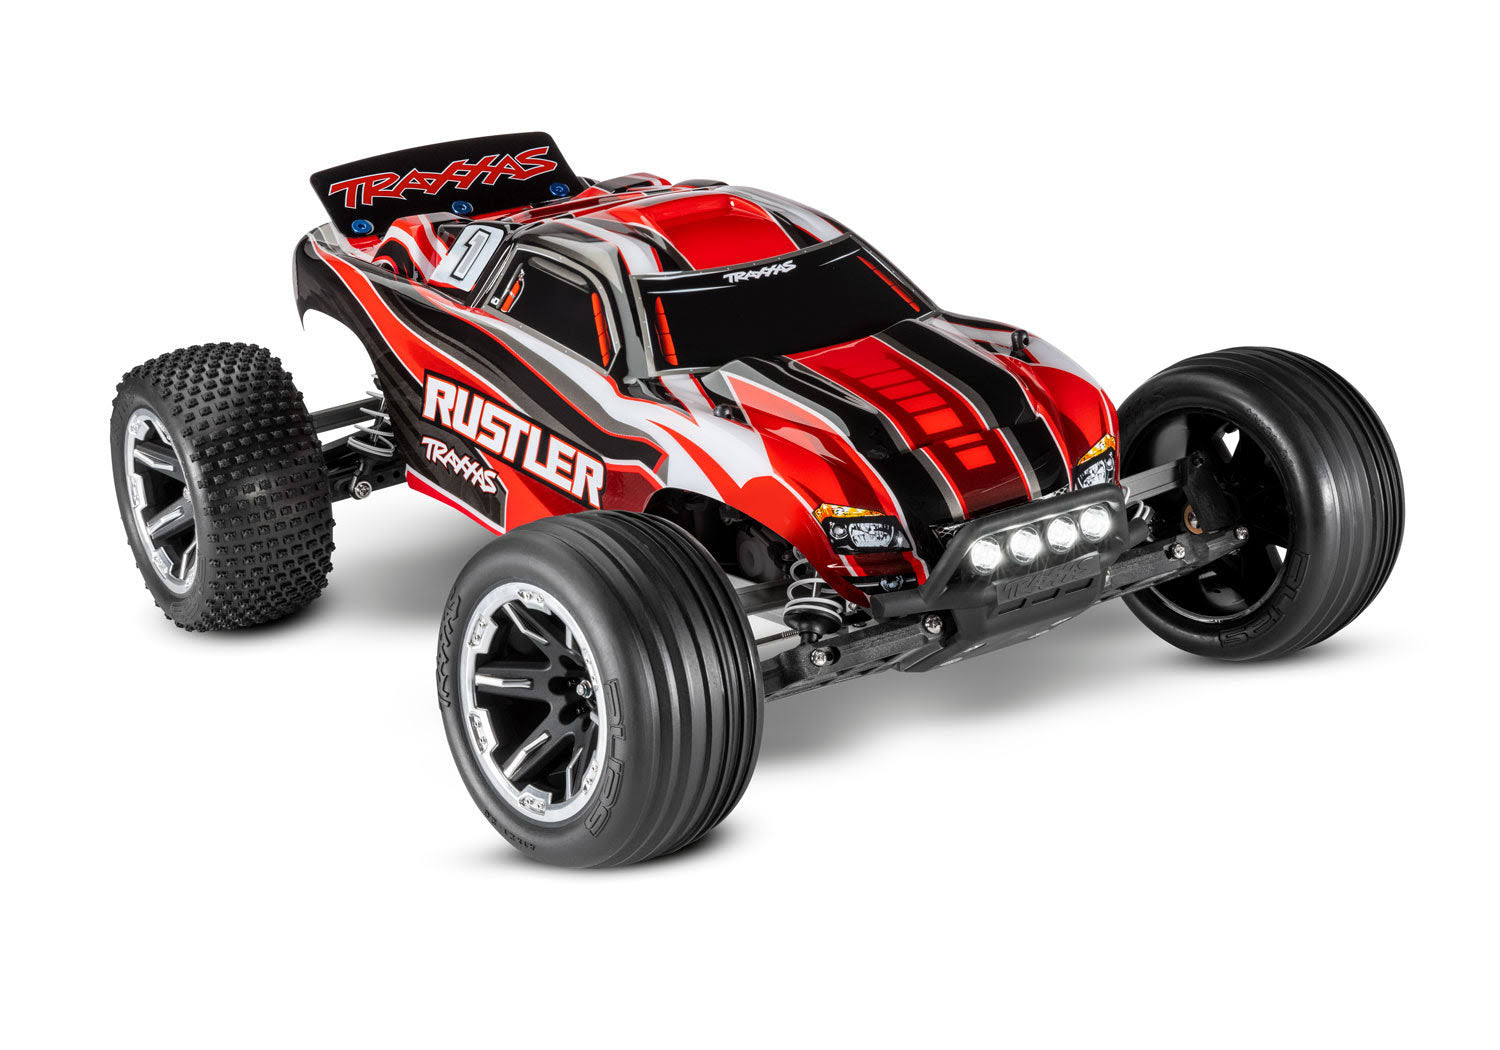 Traxxas 1/10 Rustler 2WD RTR Stadium Truck with LED Lights Red